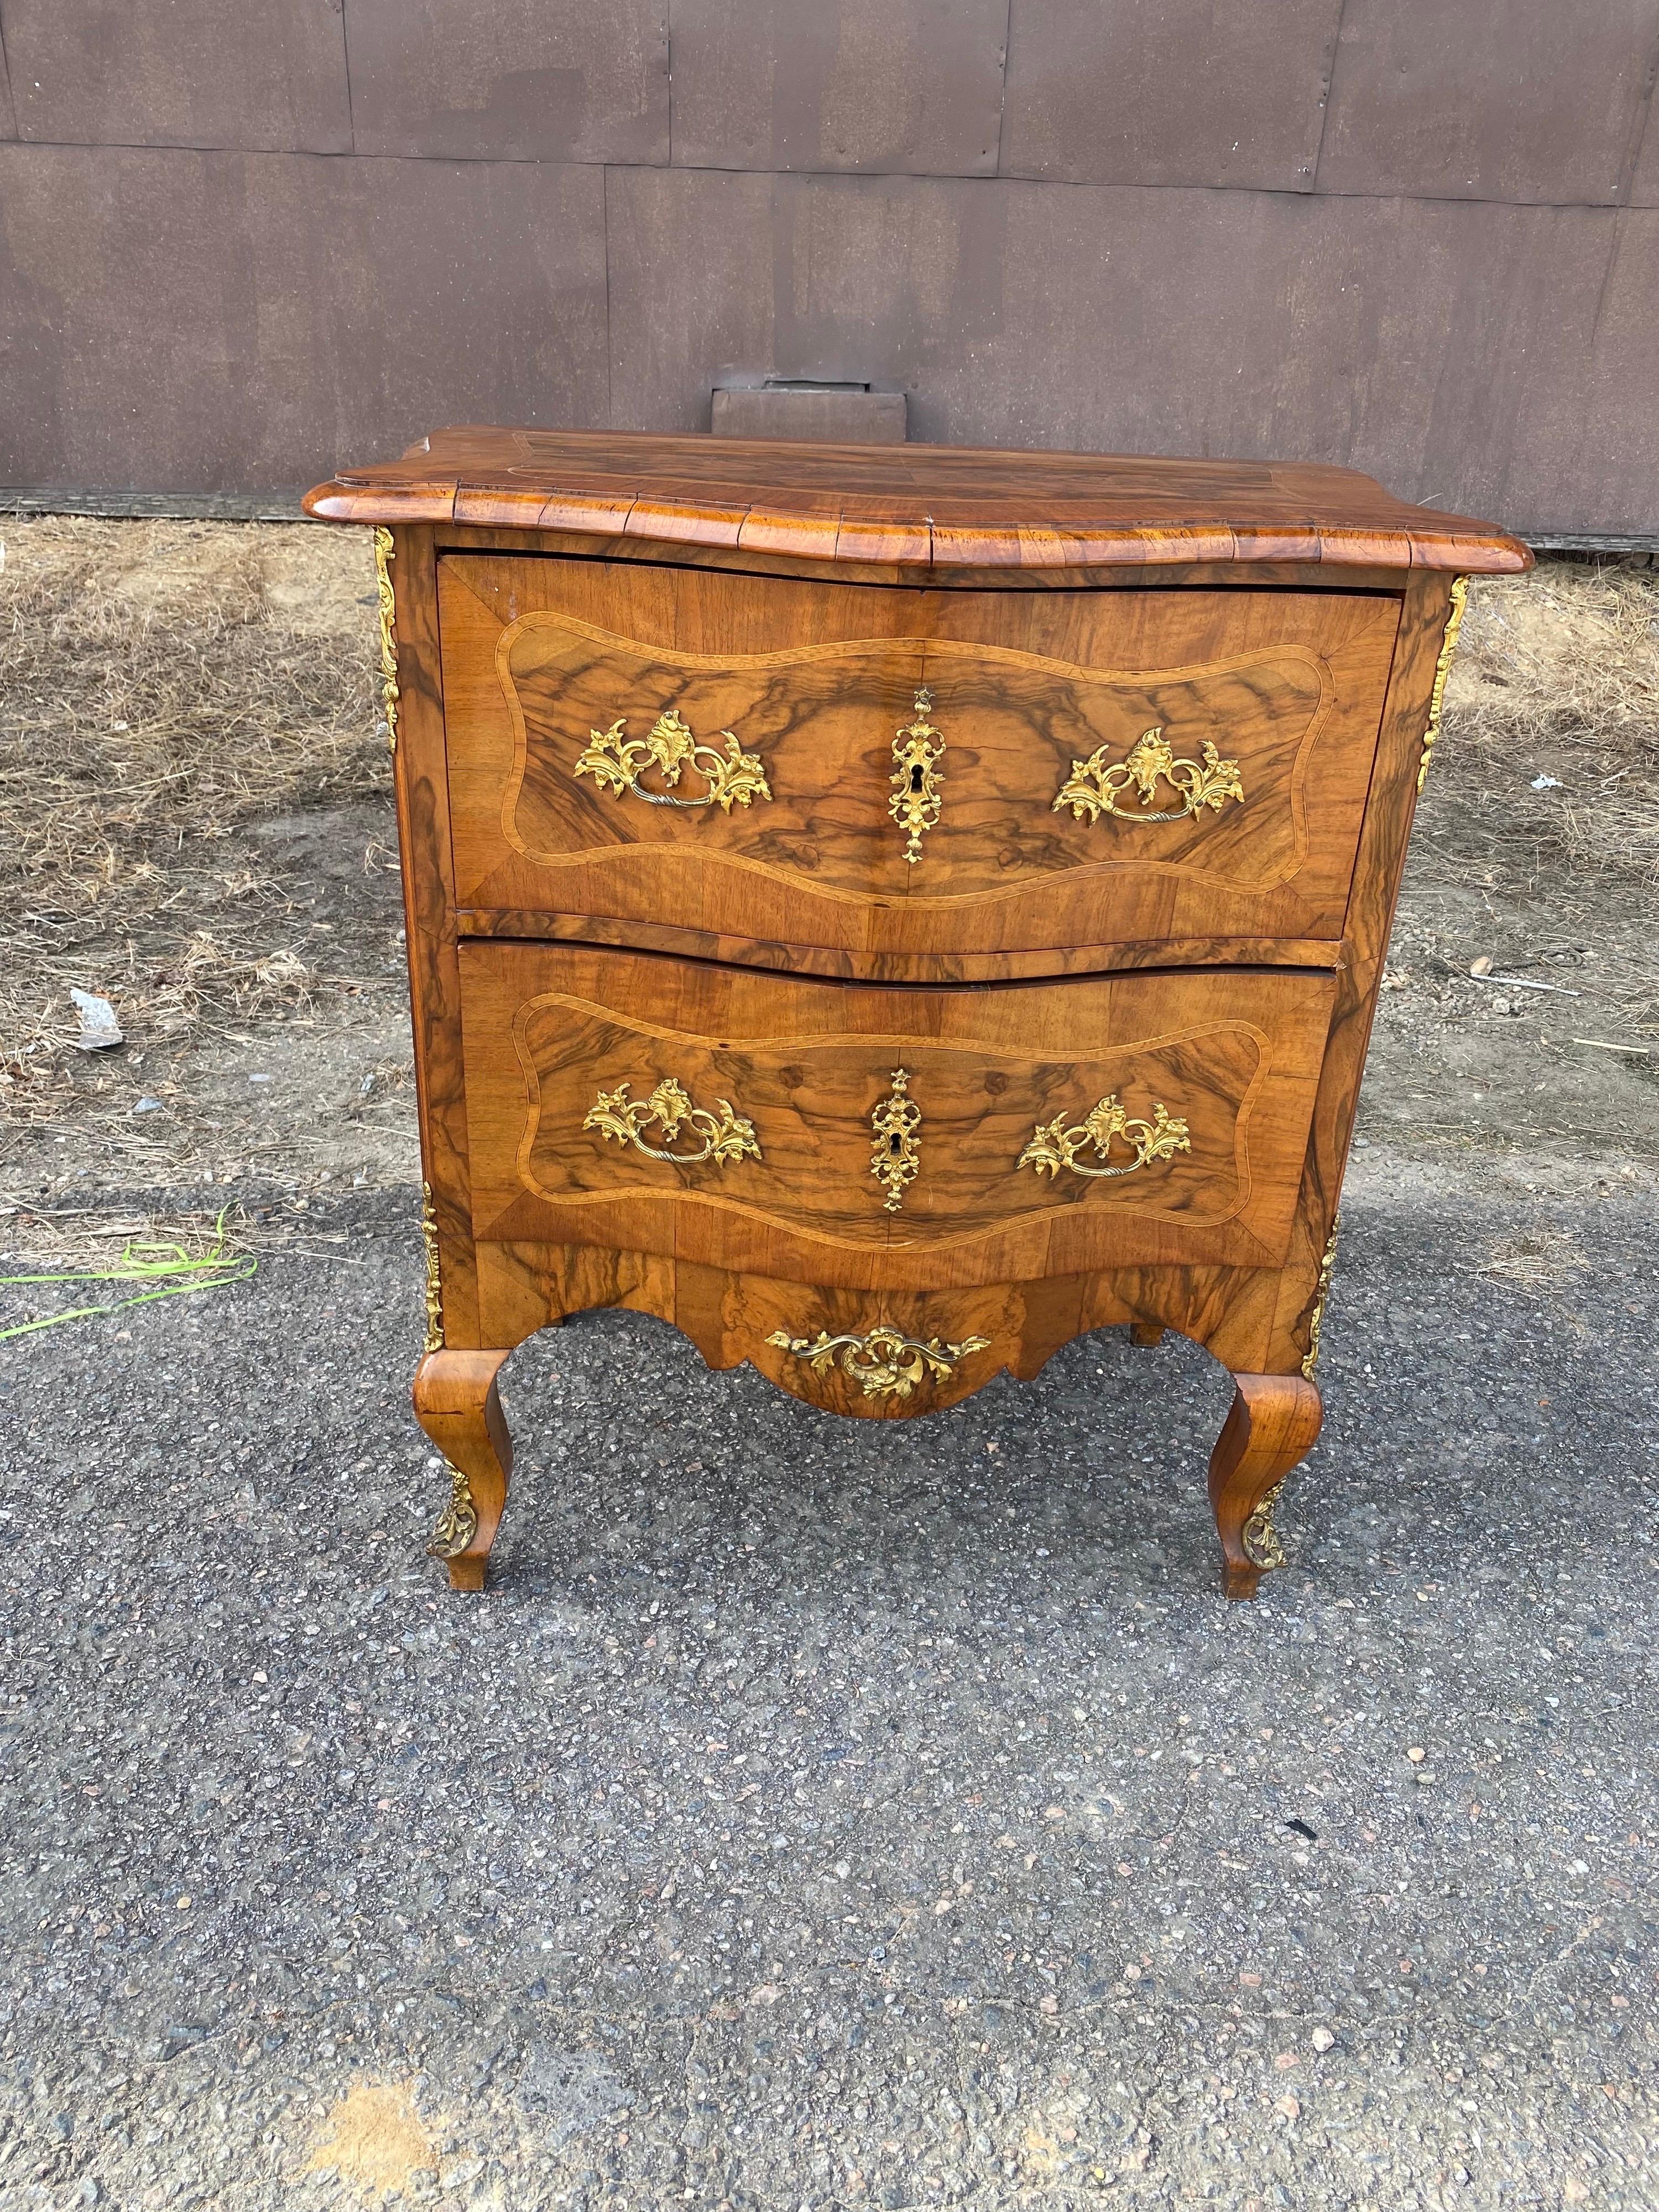 Great little 2 drawer 19th century continental inlaid bedside chest. At 31.5” high, it would be perfect as a side table or bedside chest.